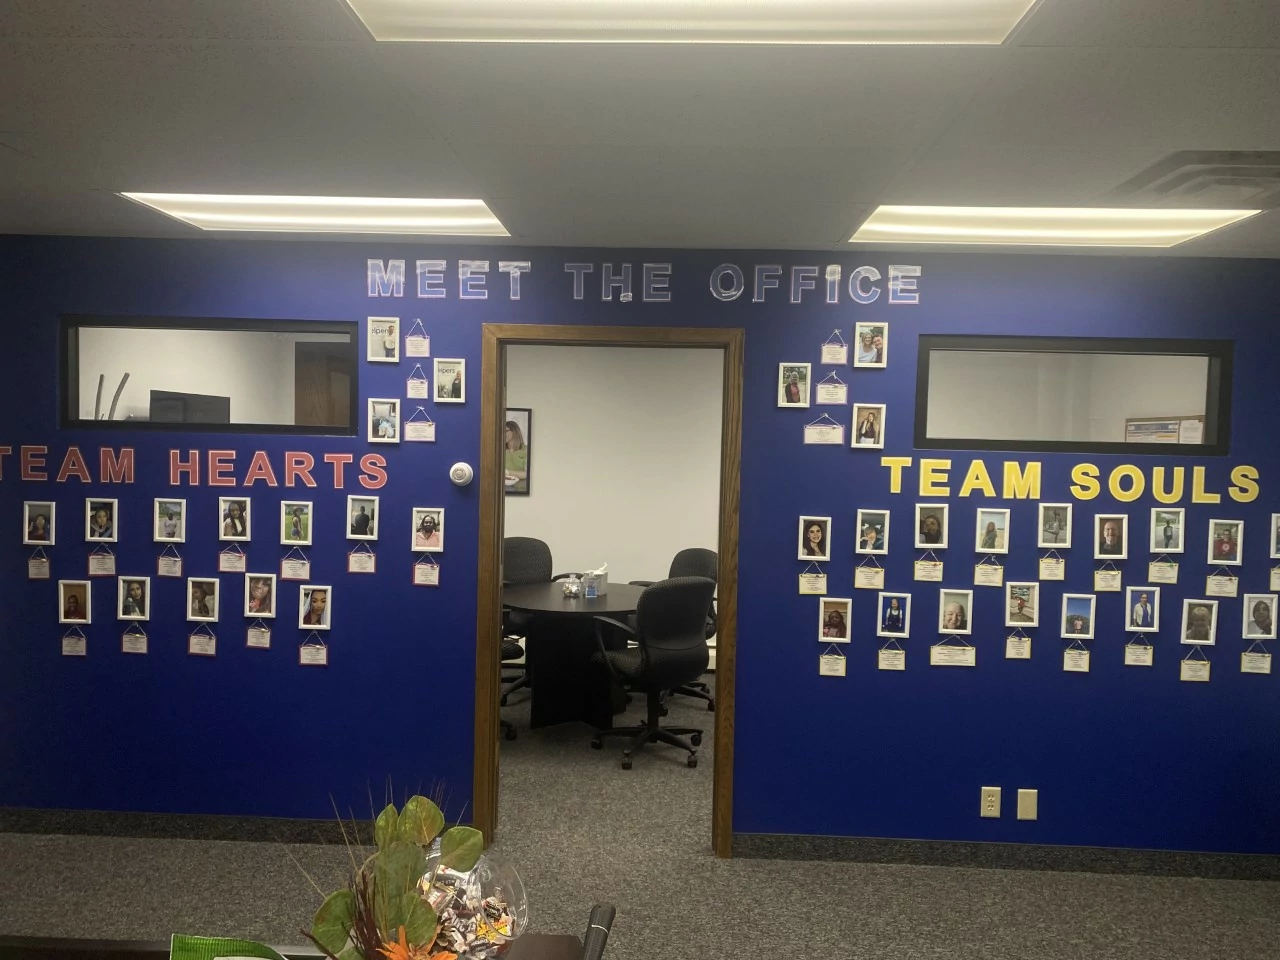 This is Roseville's Heart and Souls wall. We love honoring our fantastic caregivers by putting them up on the wall!